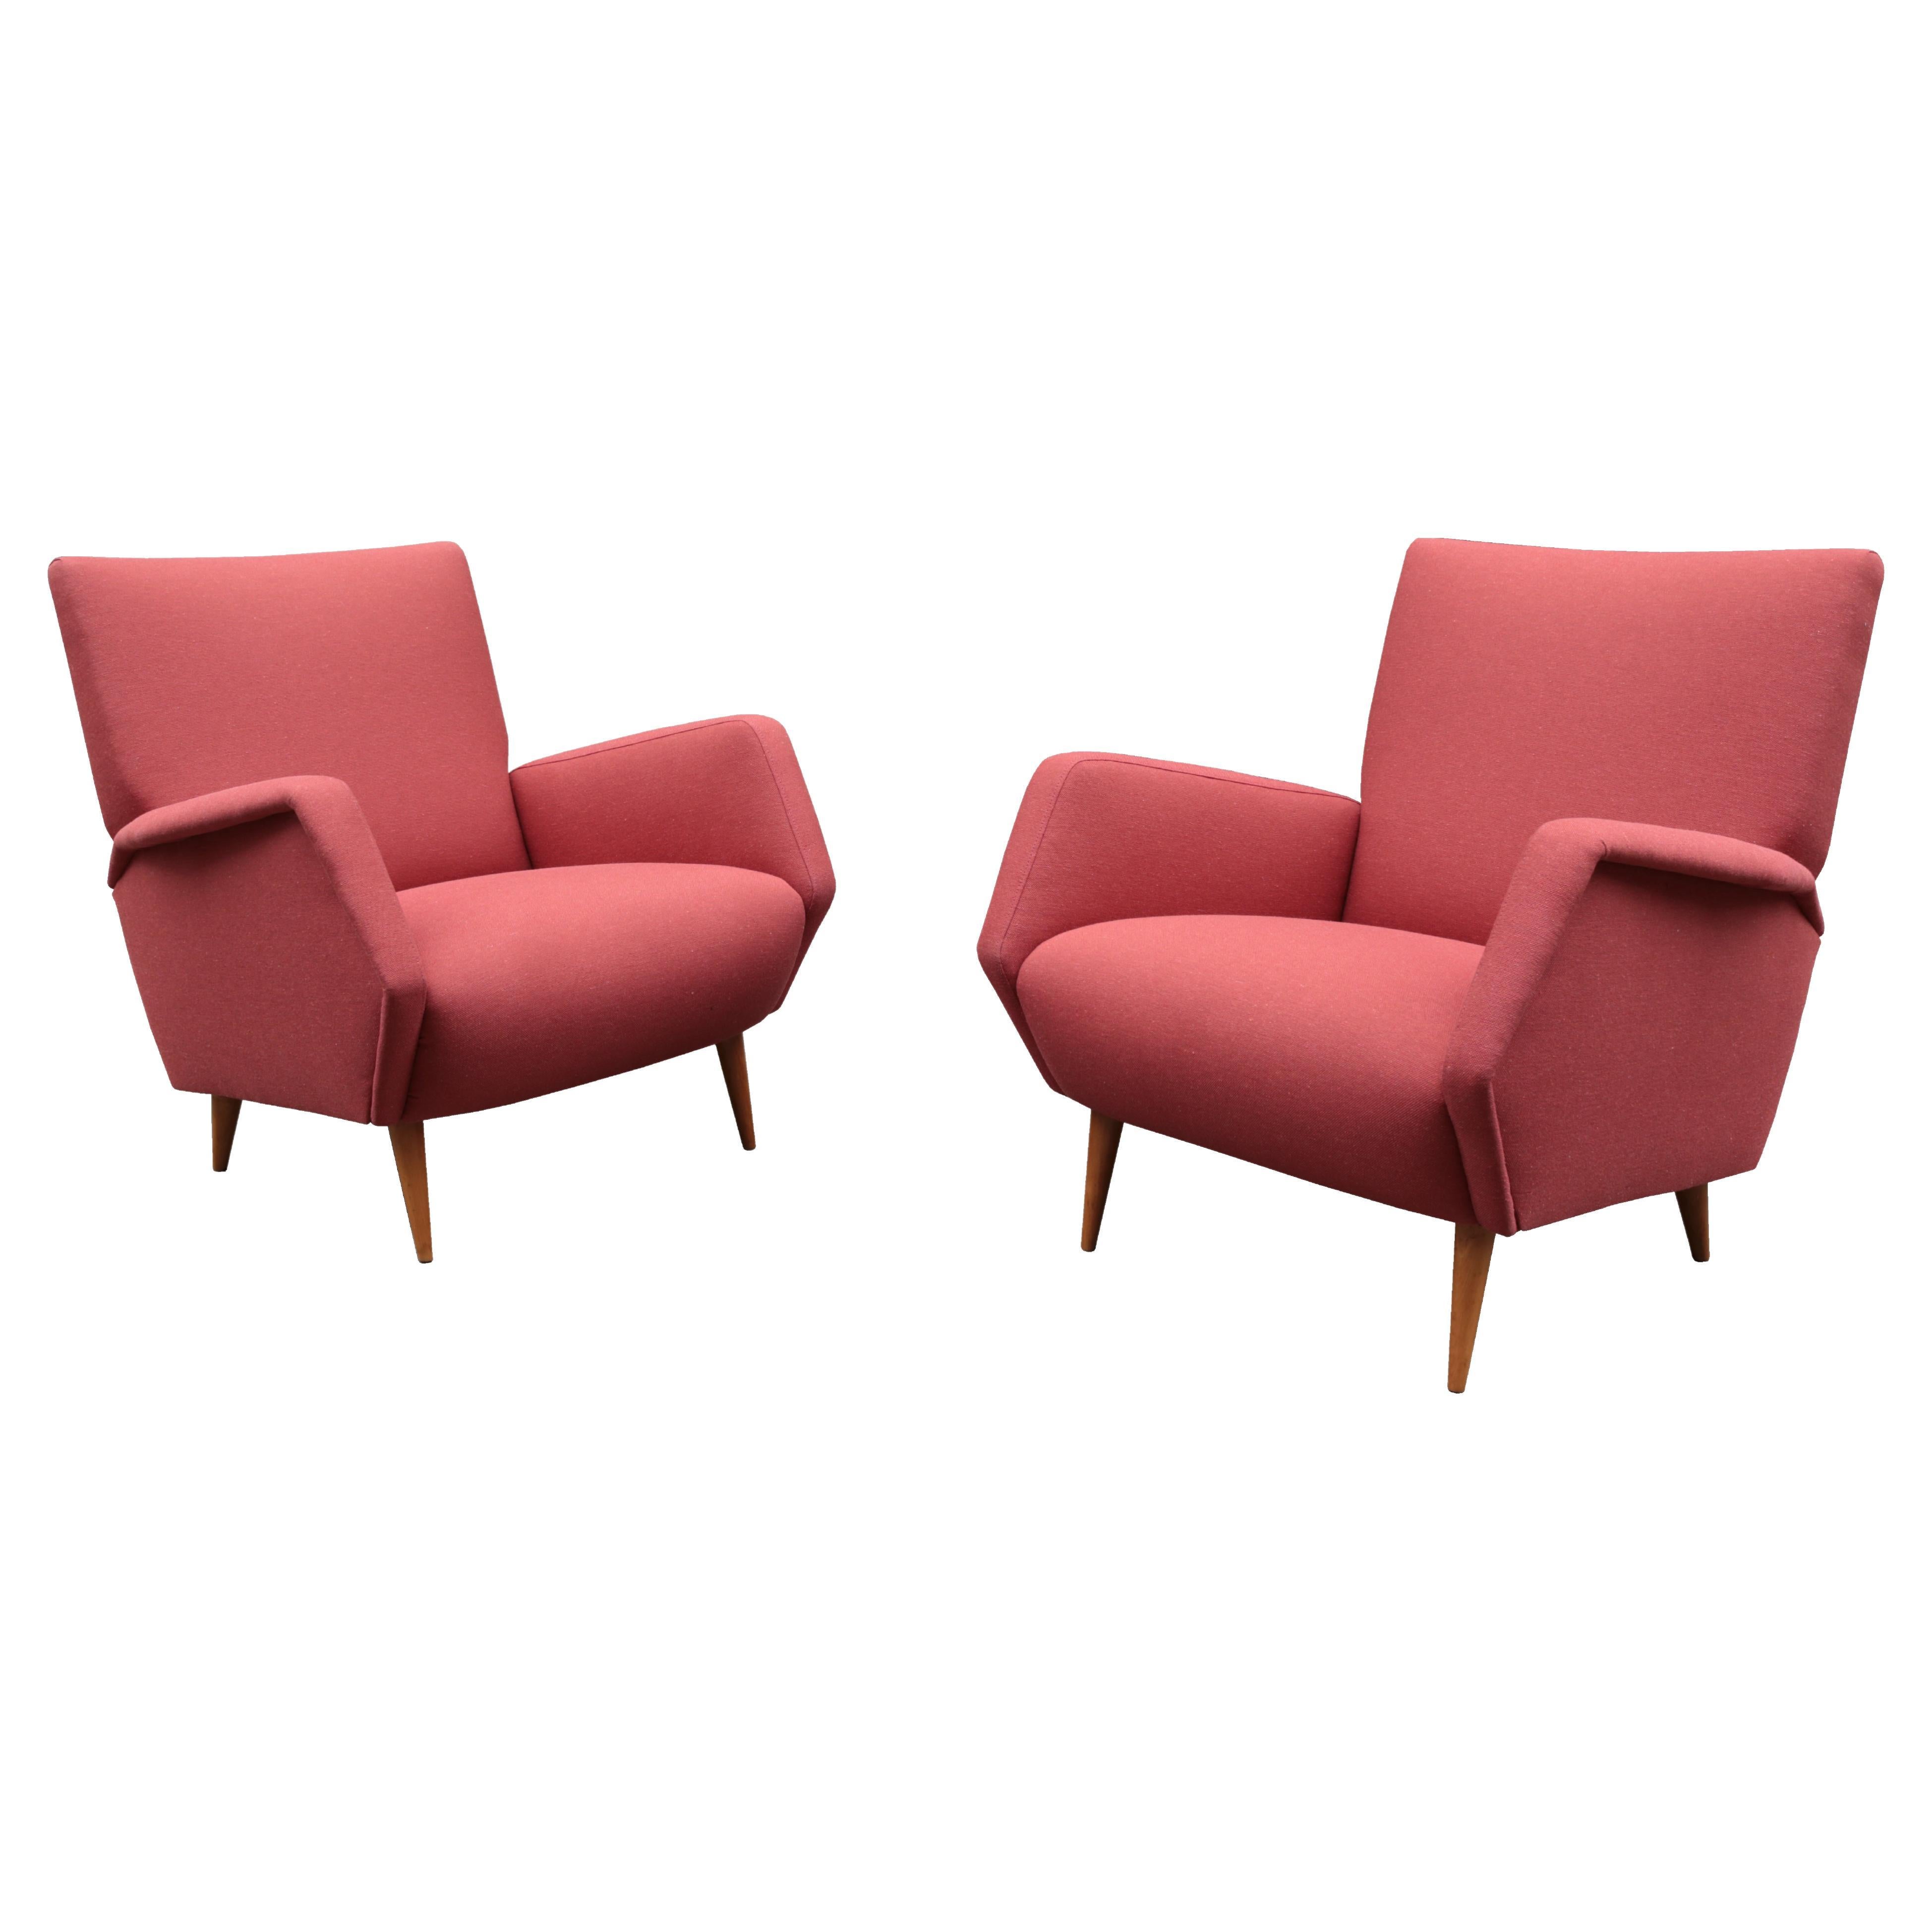 Pair of Cassina Armchairs Designed by Gio Ponti For Sale